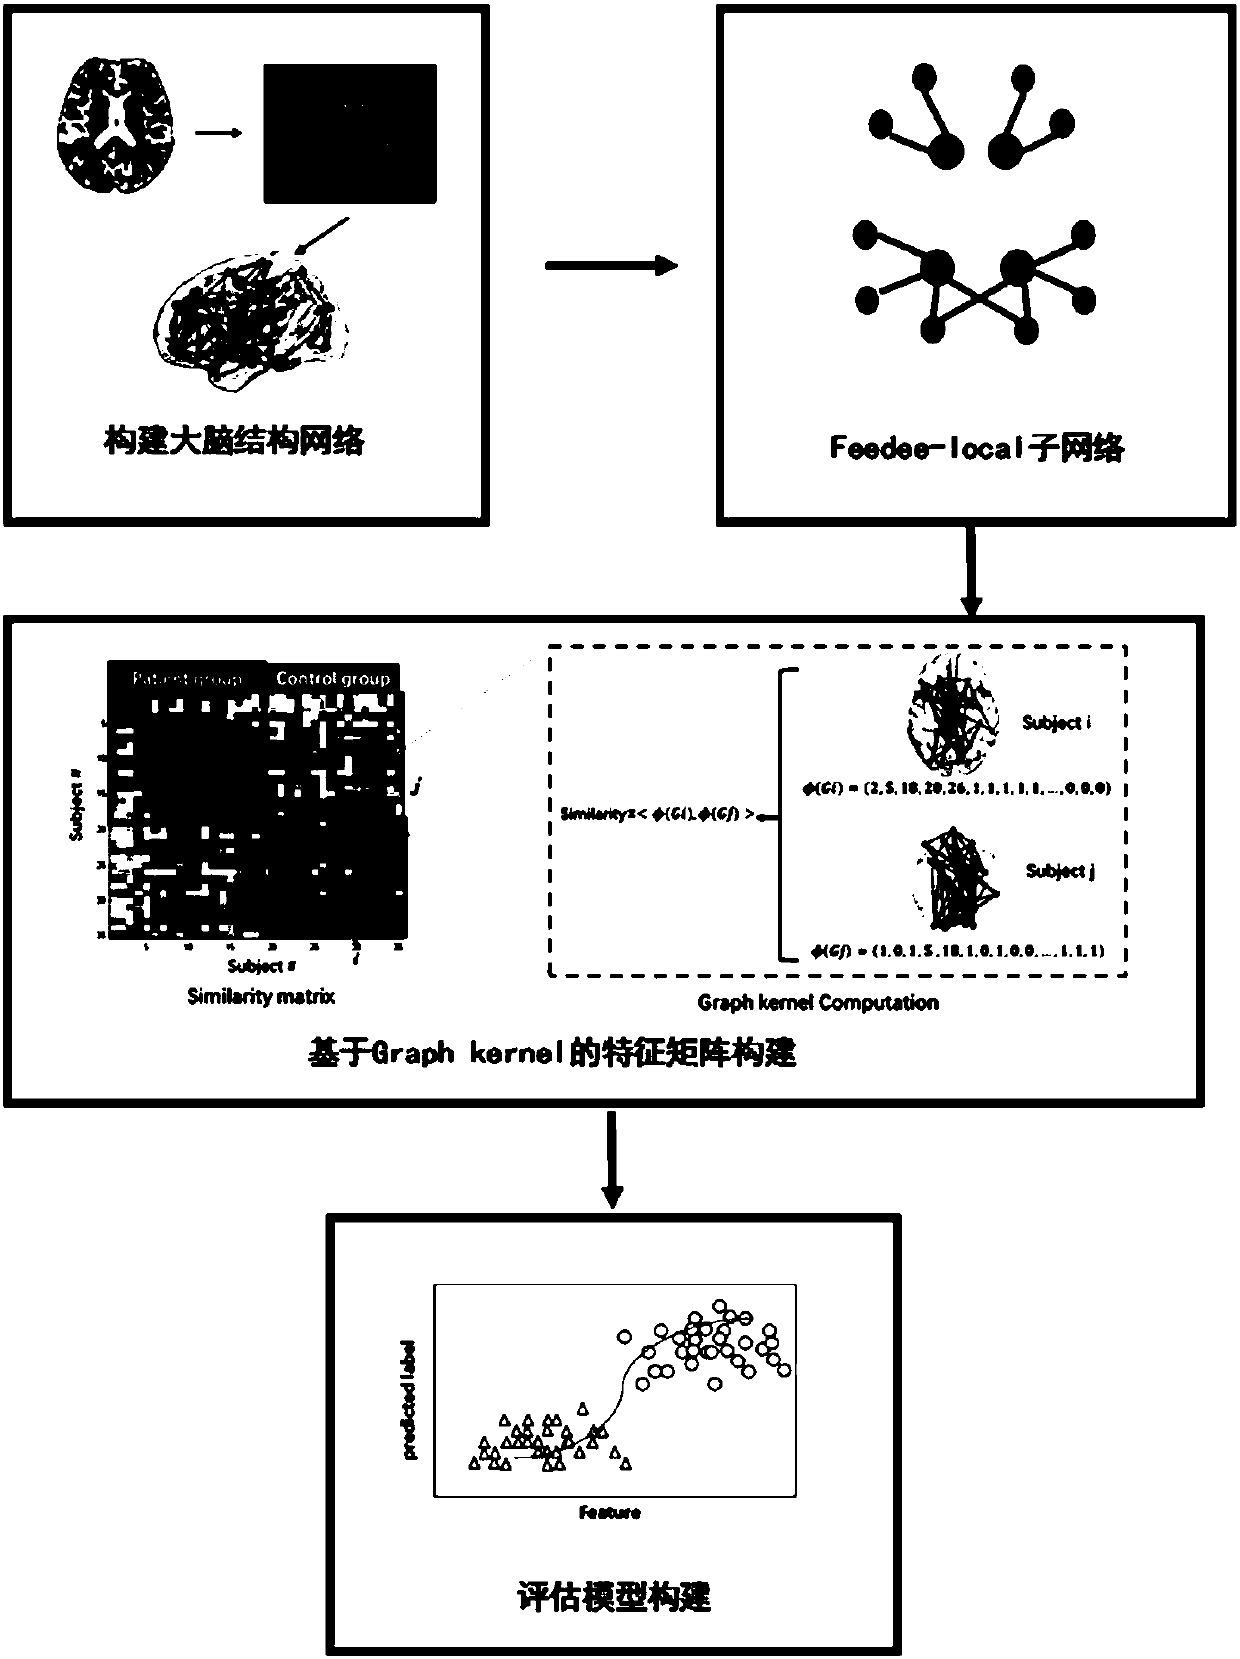 Method for evaluating disease recovery of patient suffering from depression based on diffusion tensor imaging